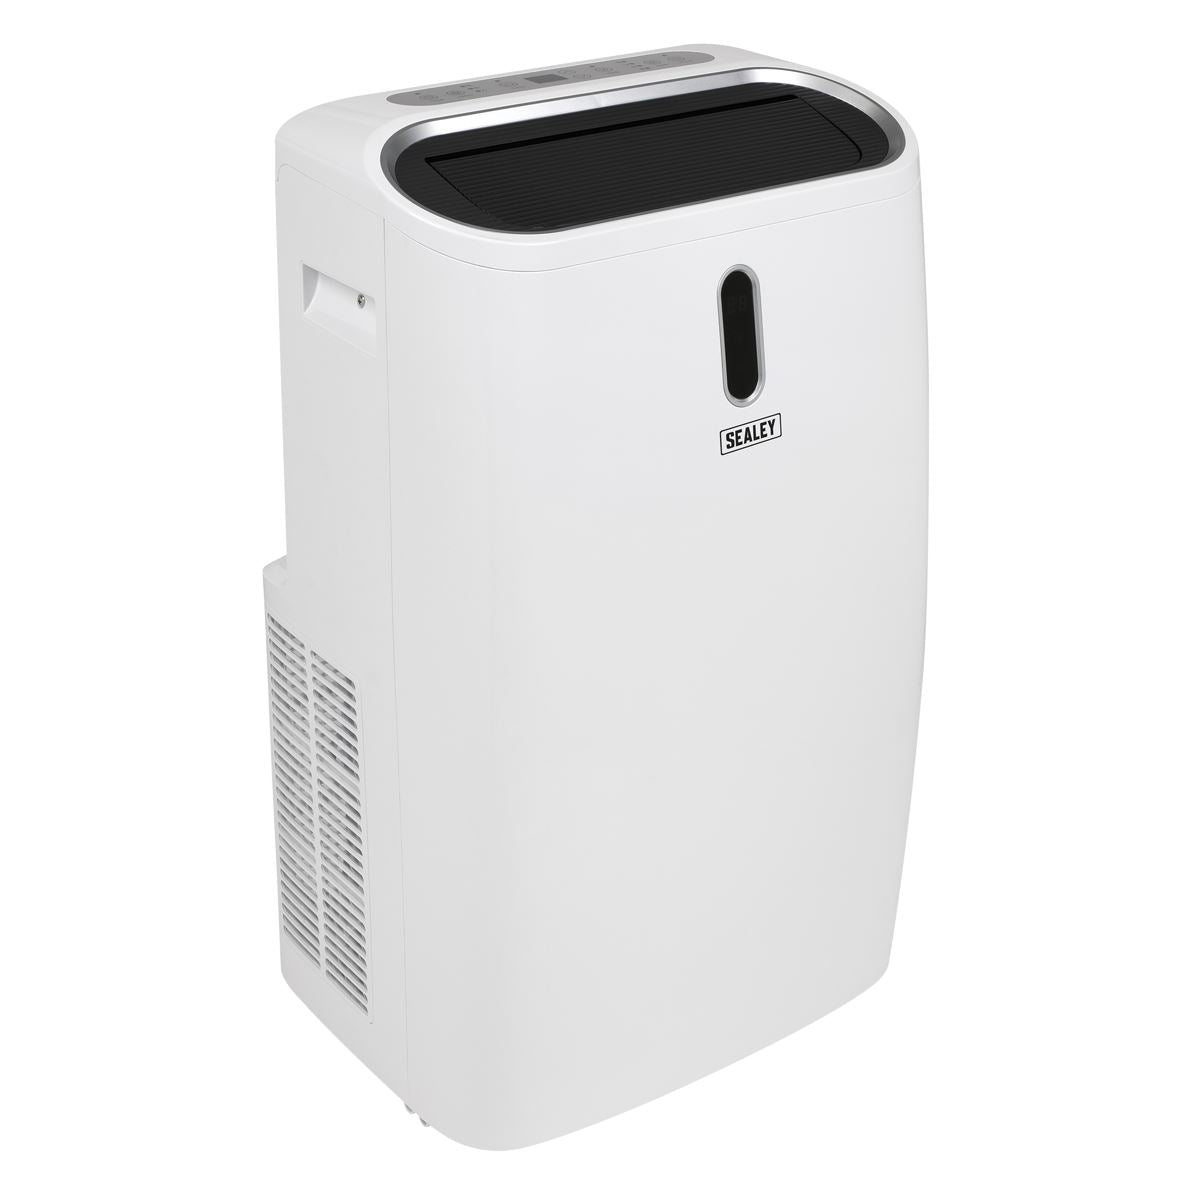 Sealey Portable Air Conditioner/Dehumidifier/Air Cooler/Heater with Window Sealing Kit 16,000Btu/hr